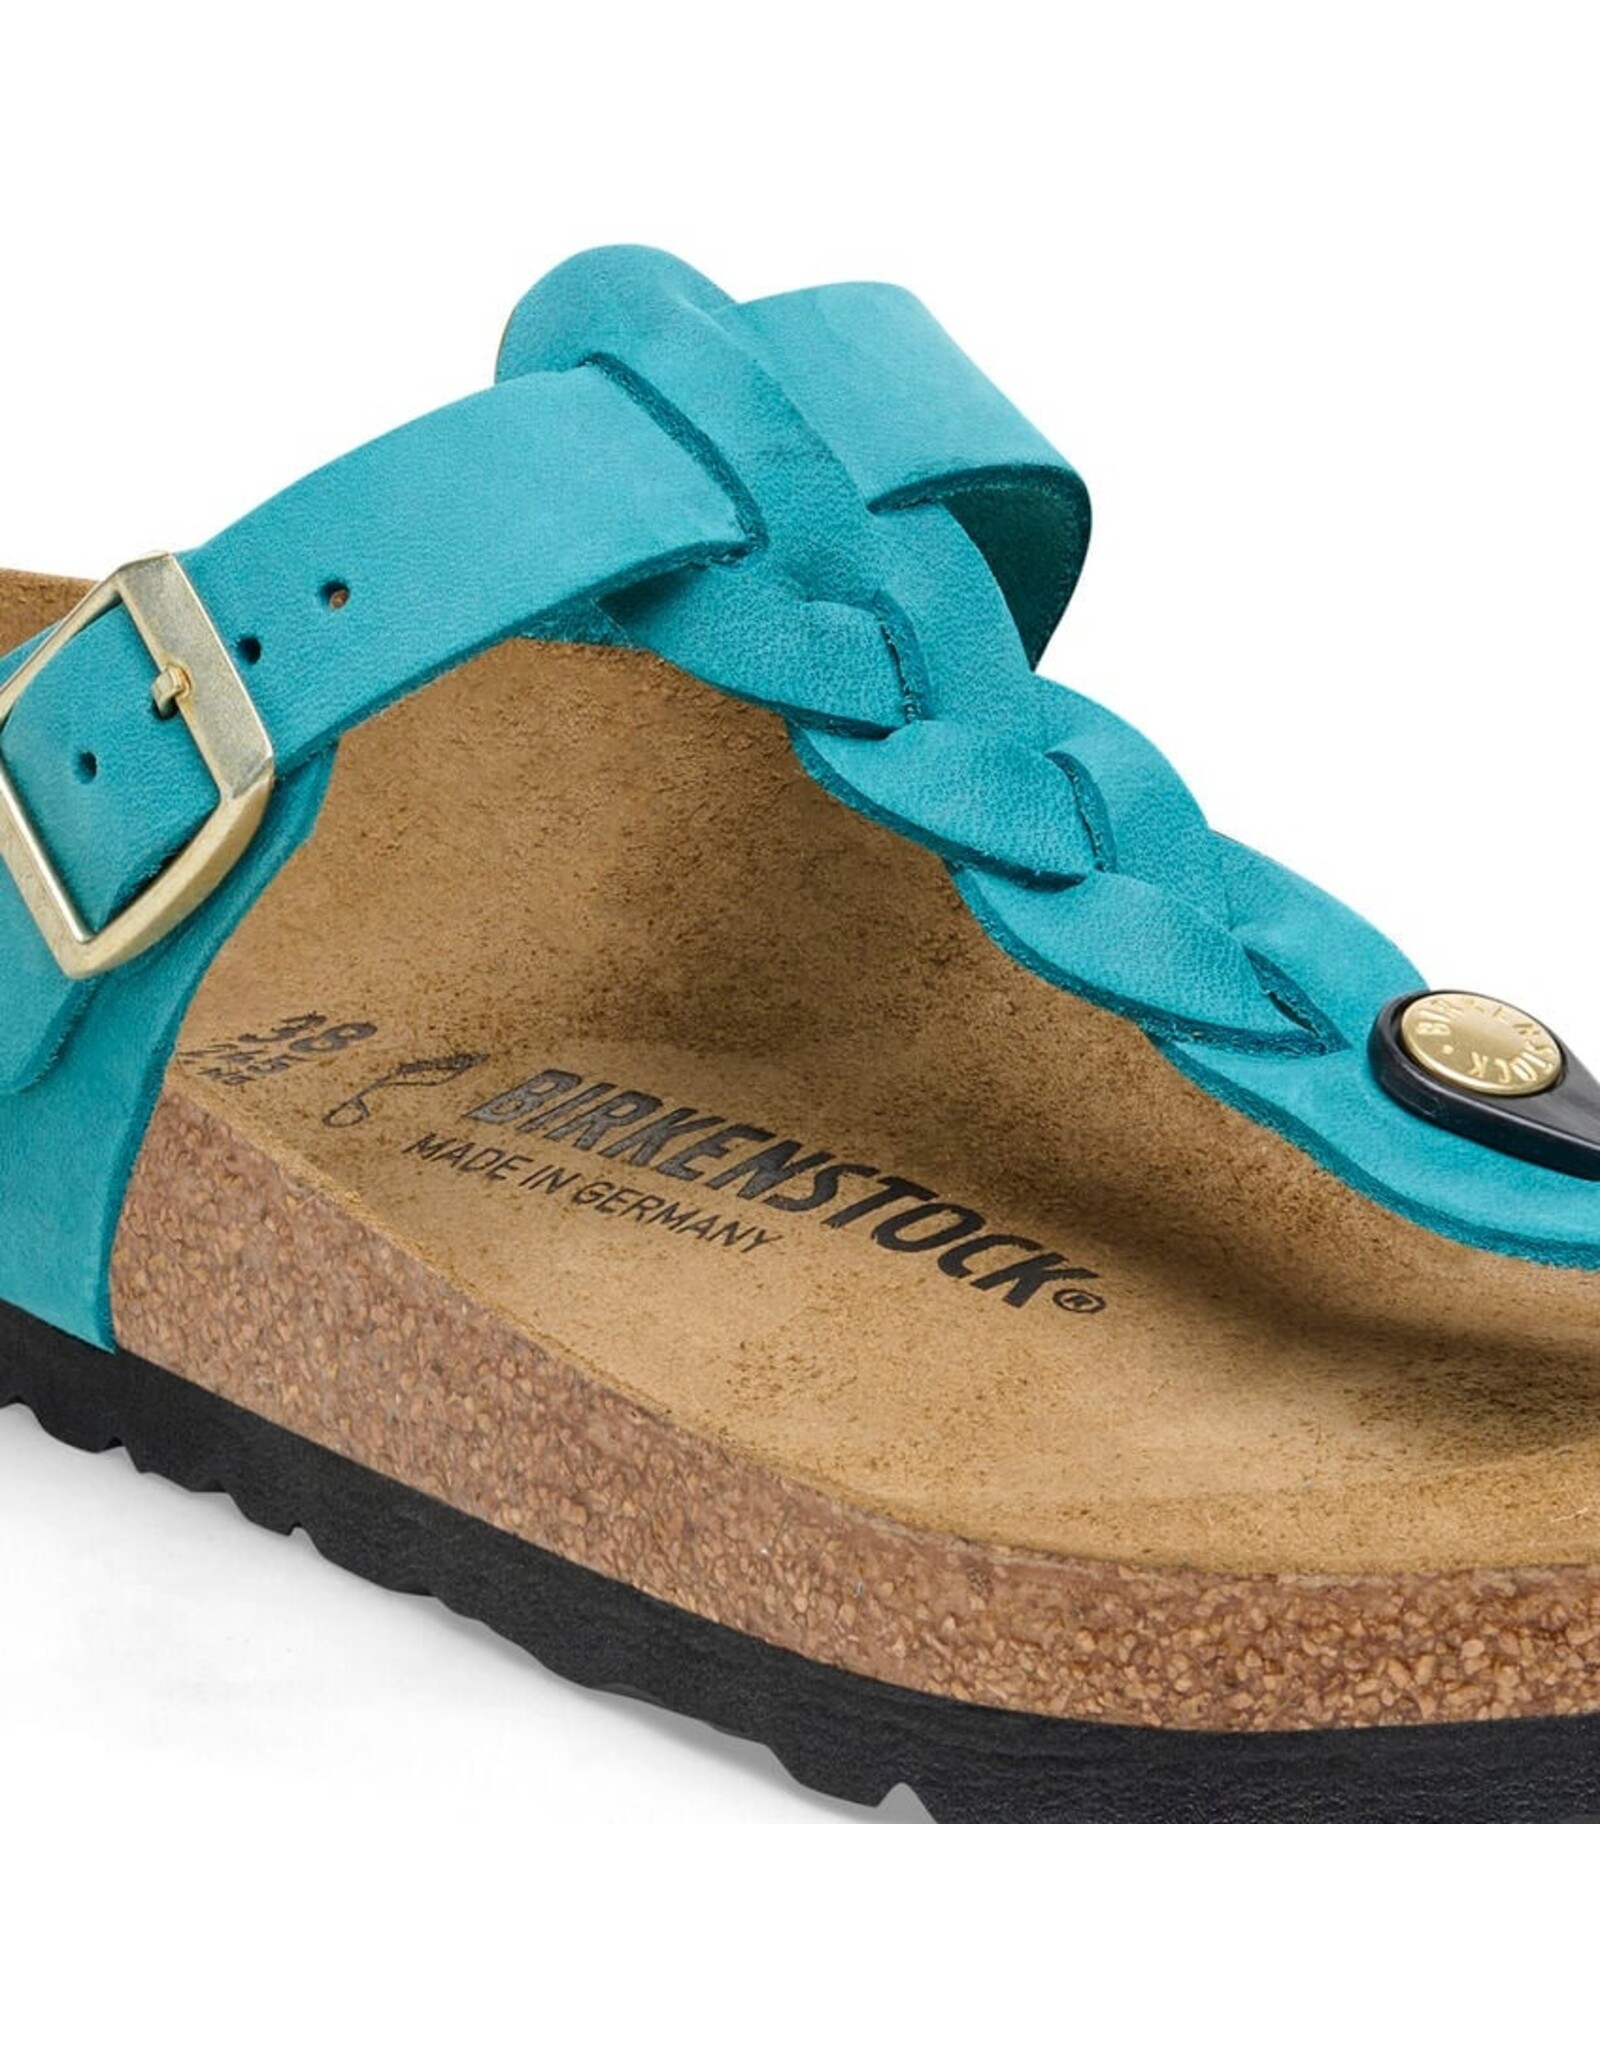 BIRKENSTOCK GIZEH BRAID OILED LEATHER-BISCAY BAY